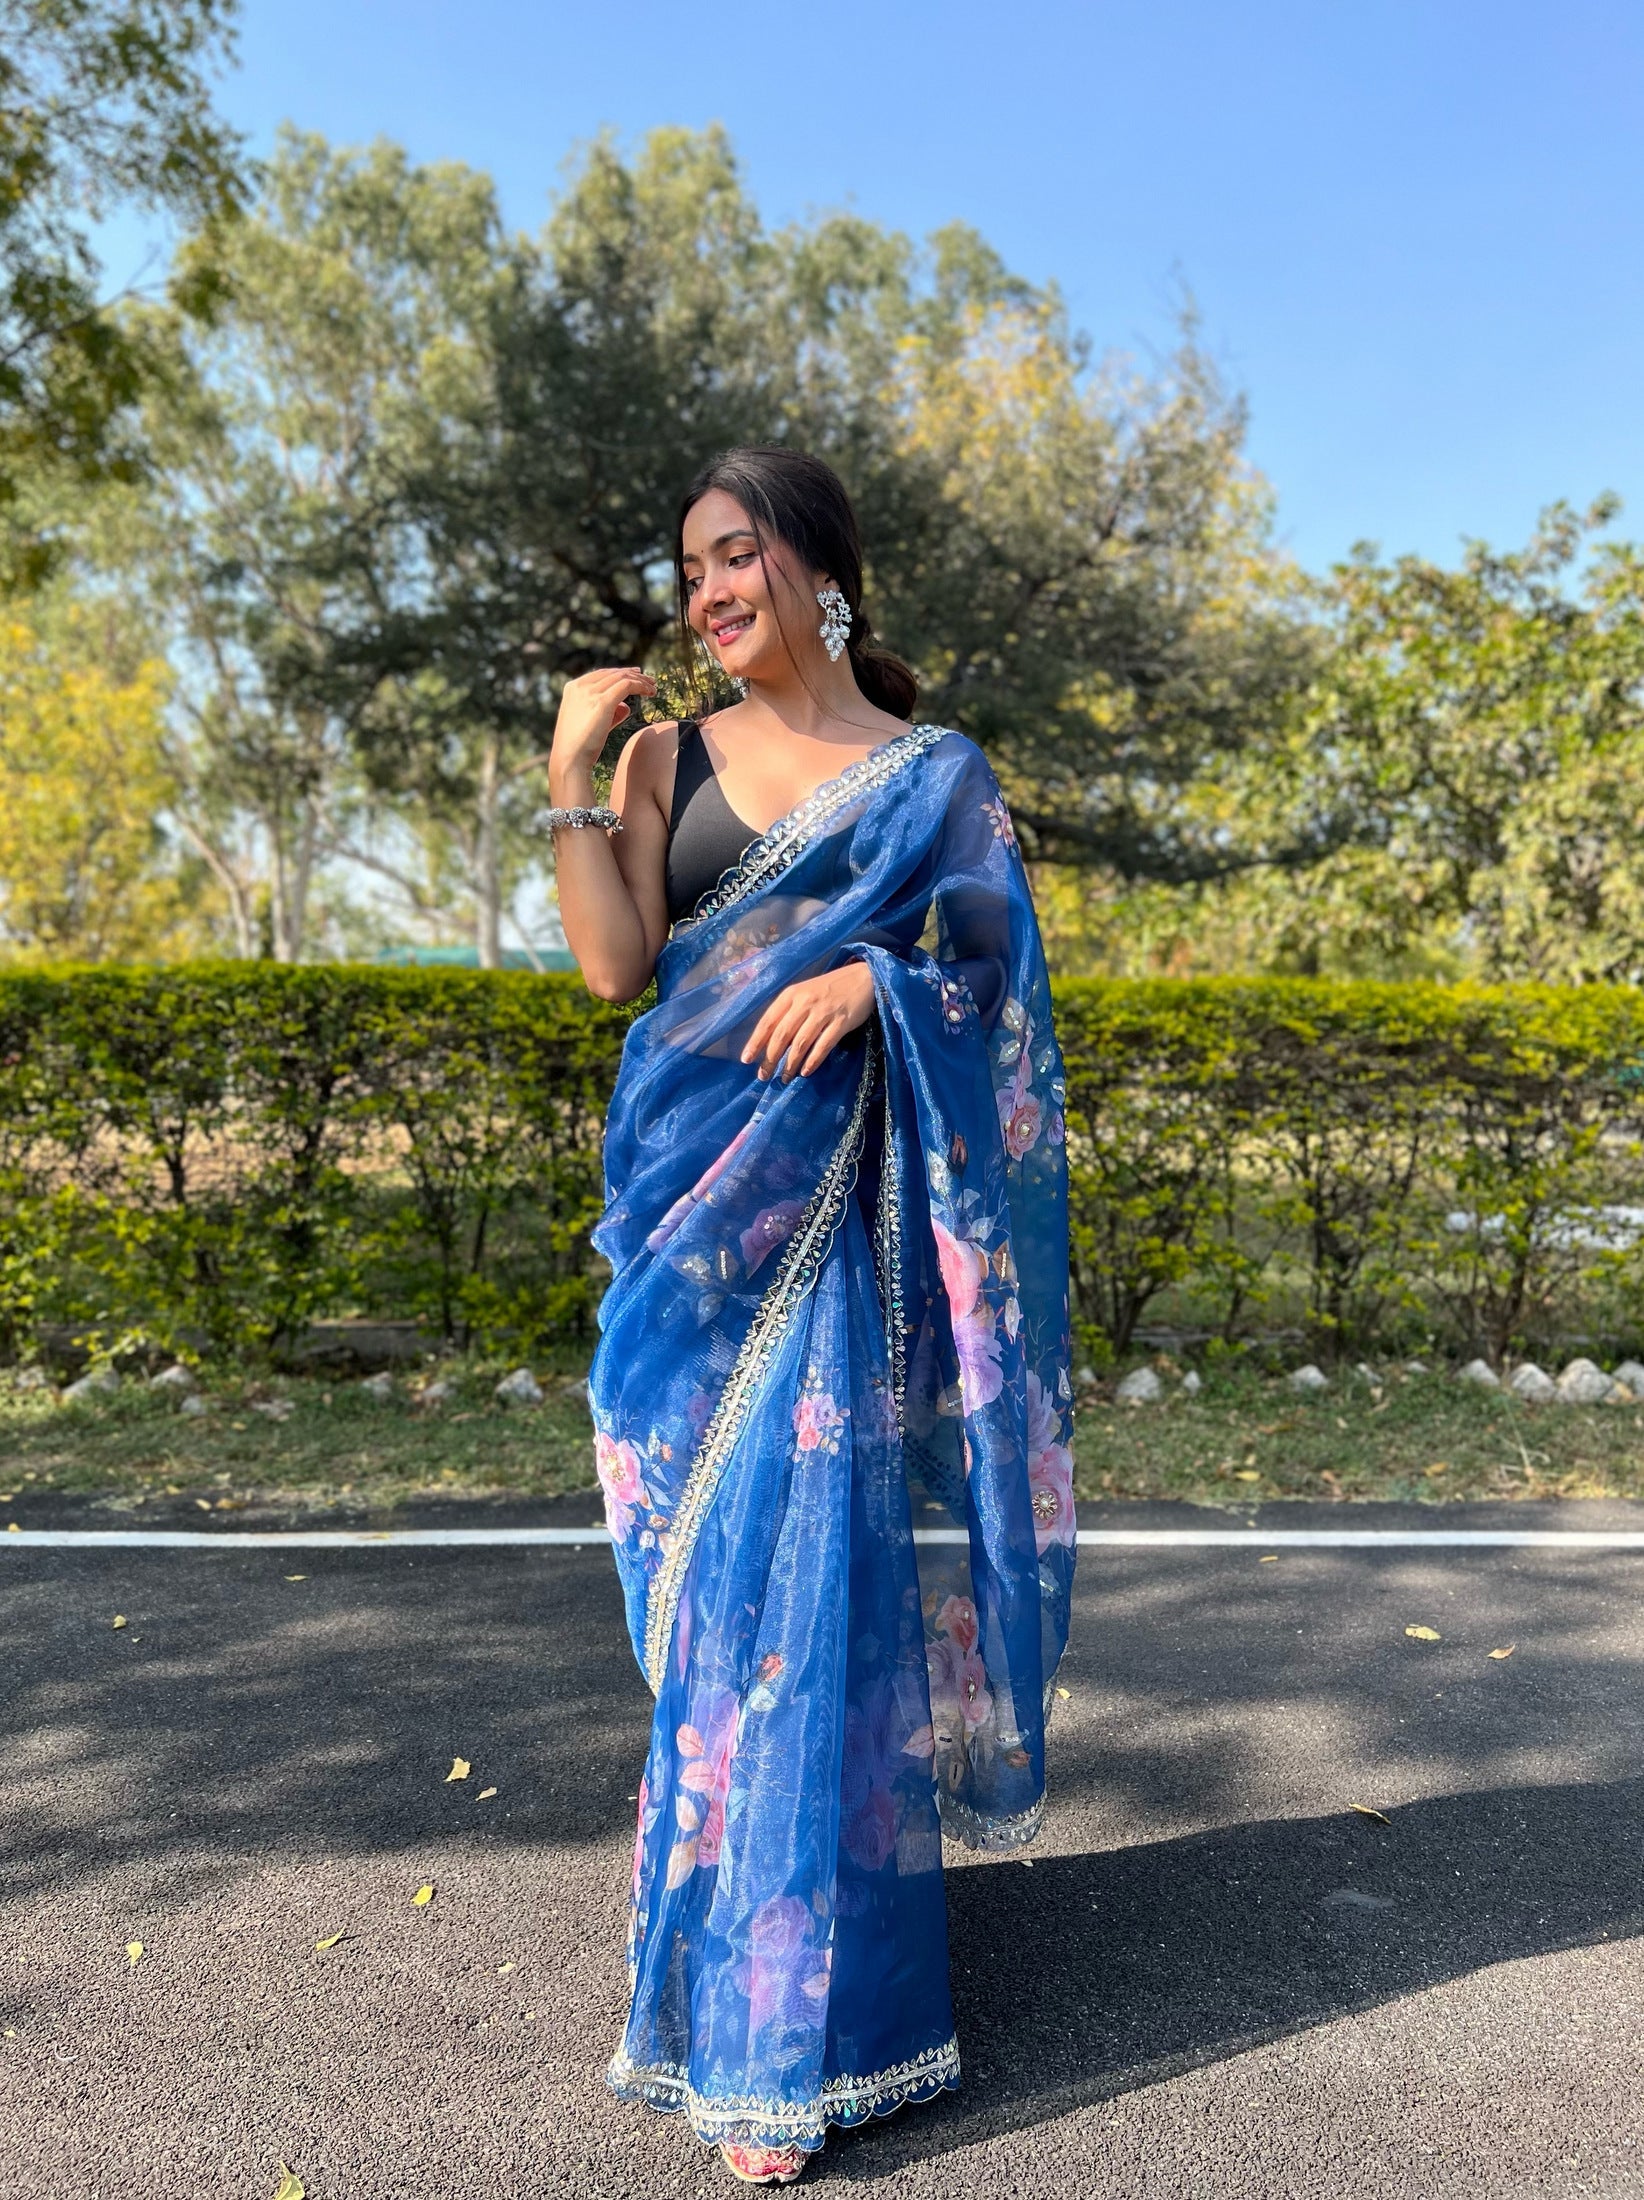 Sonam Kapoor in a ripped denim saree for Veere Di Wedding promotions! |  Long blouse designs, Indian fashion saree, Sonam kapoor fashion